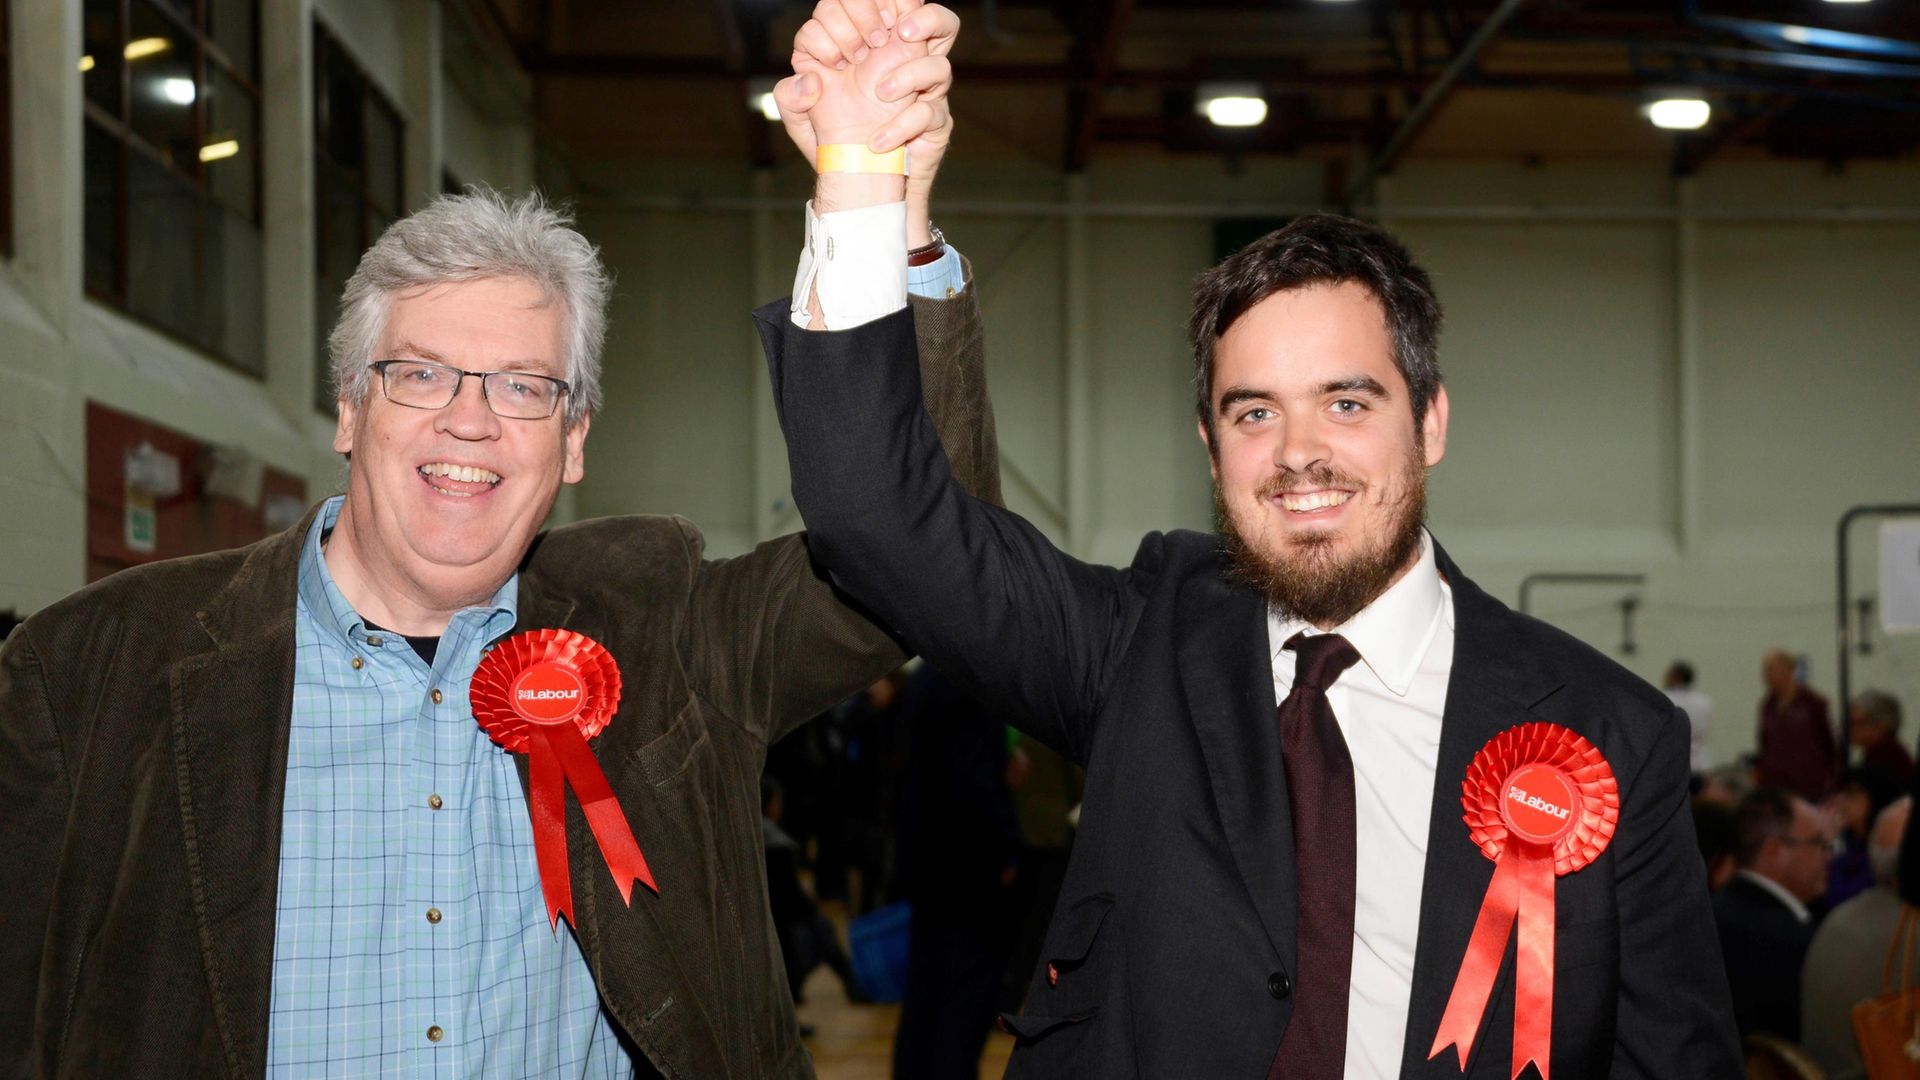 Alex Ward celebrates his election victory with dad David. - Credit: Contributed